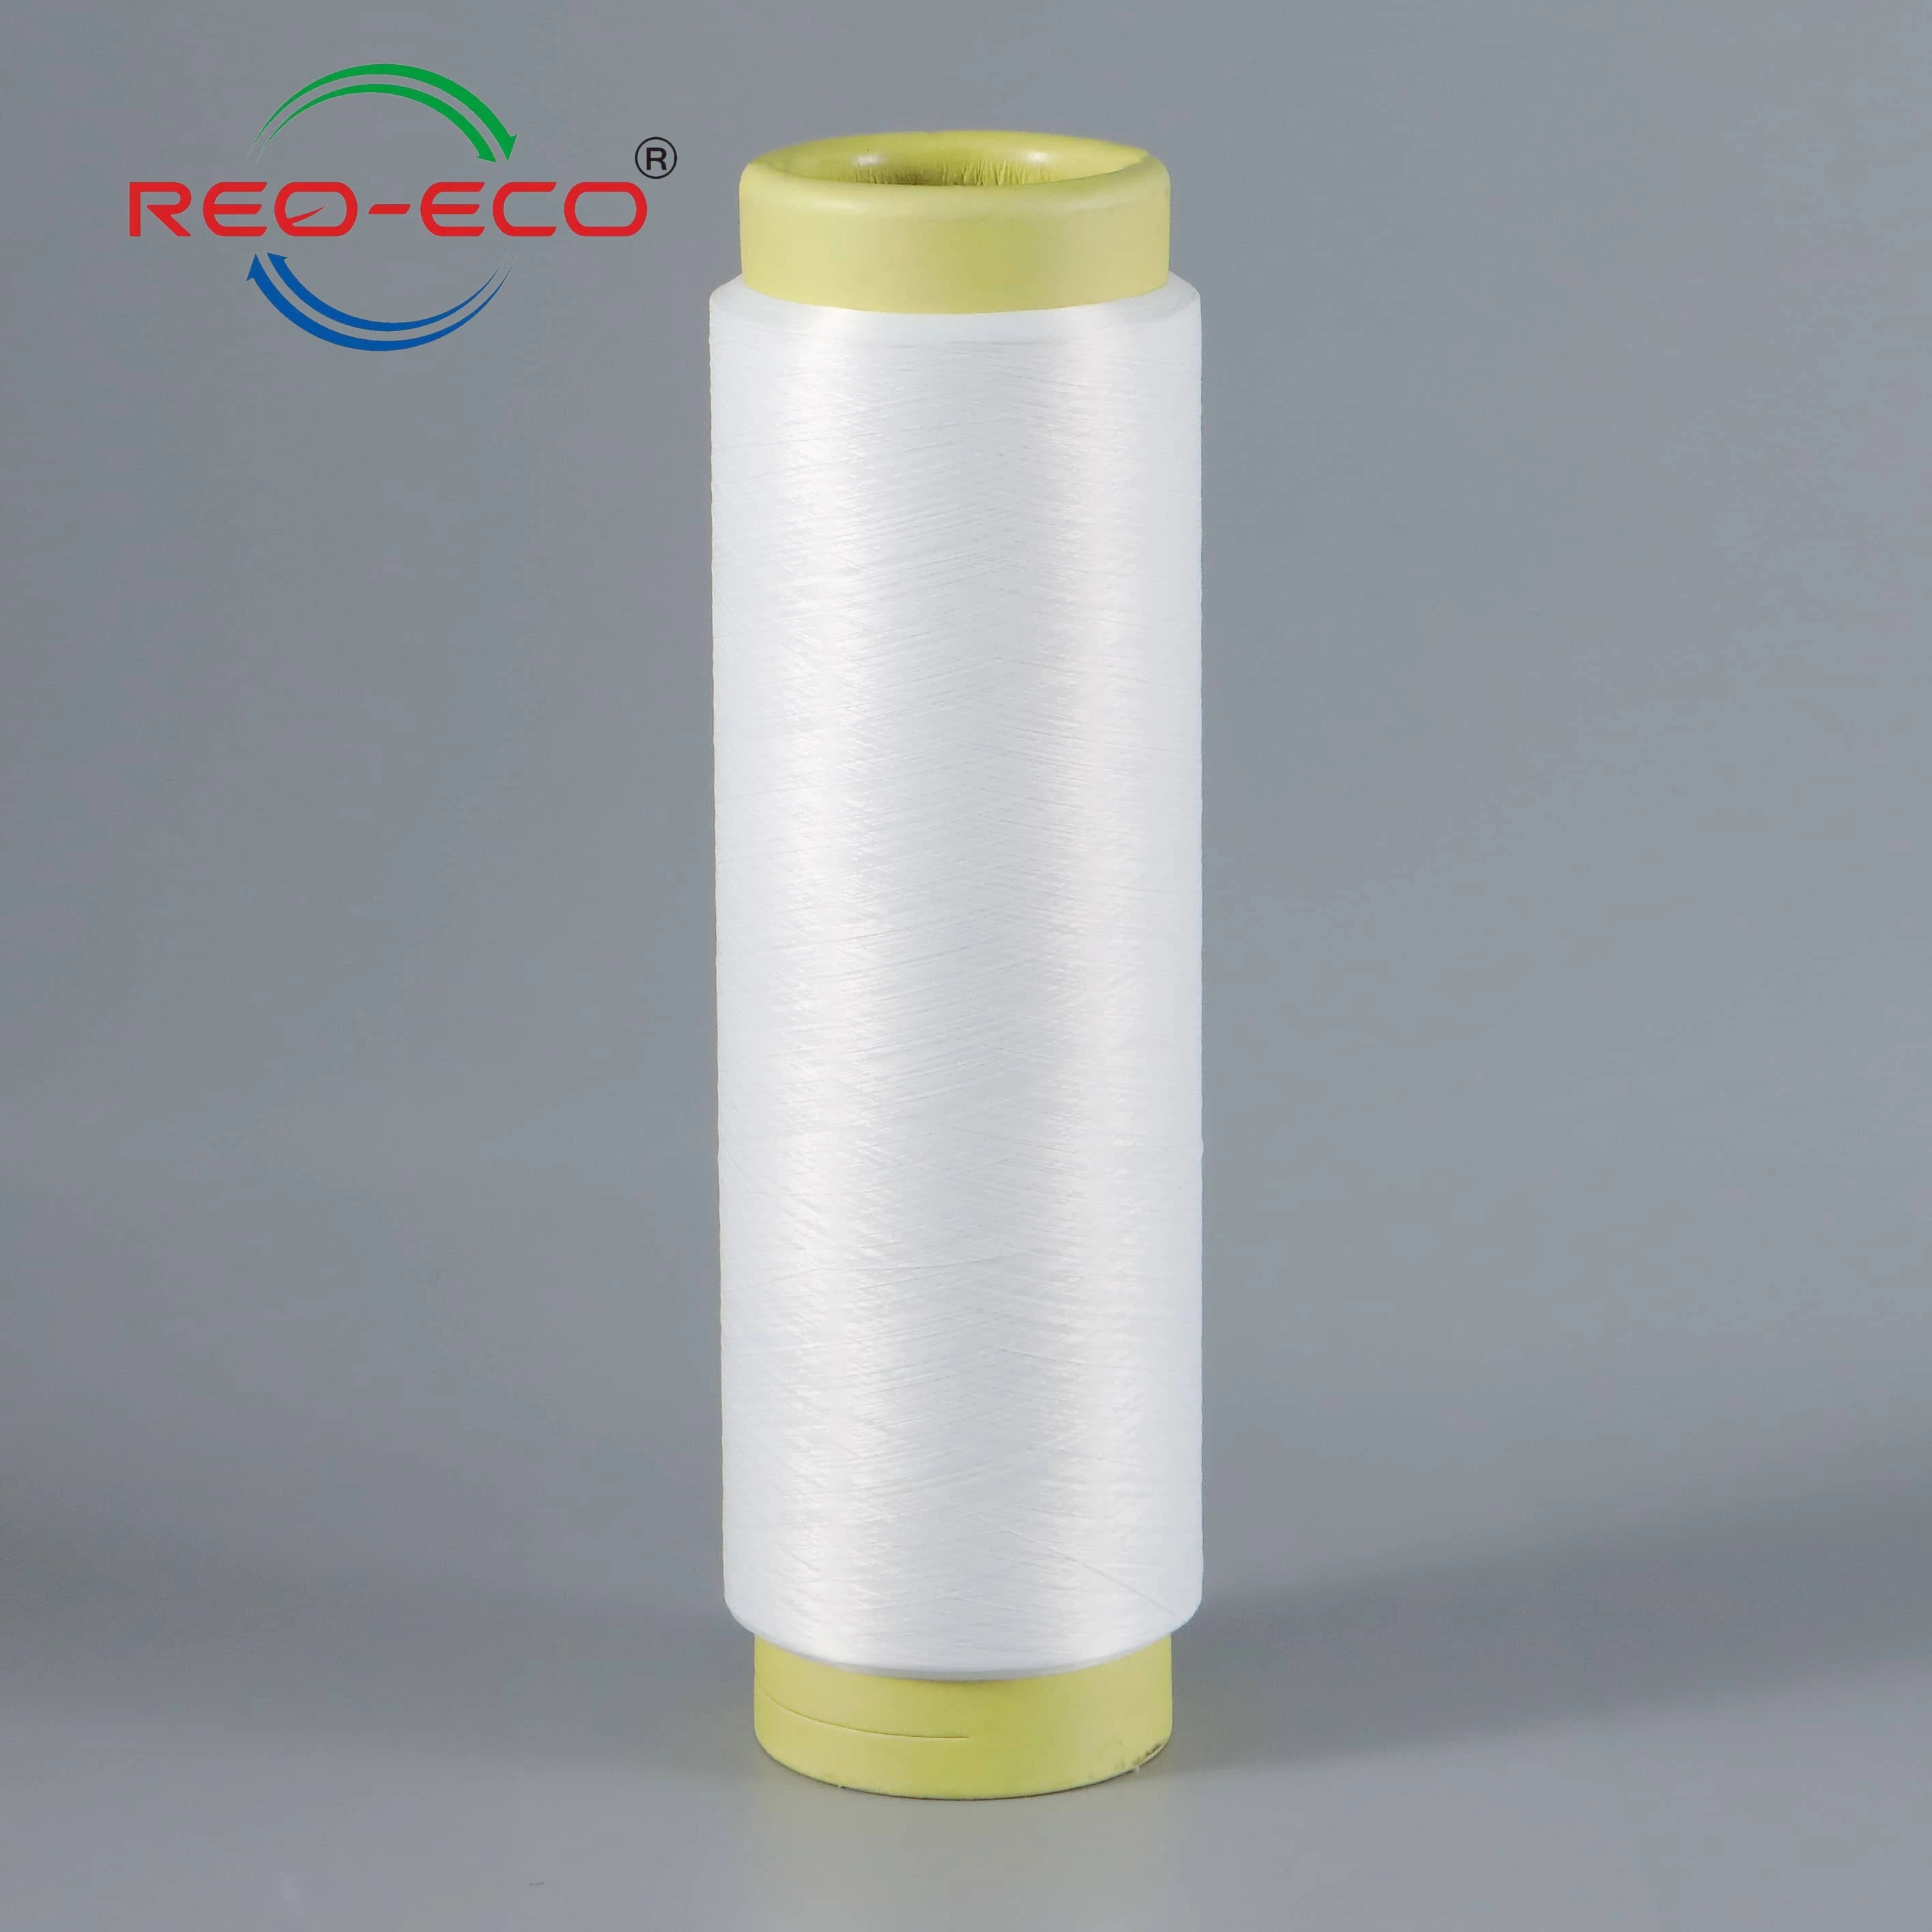 100% Recycled Post-Consumer Dyed POY 75D/72f Polyester Filament Yarn with Grs Oekotex